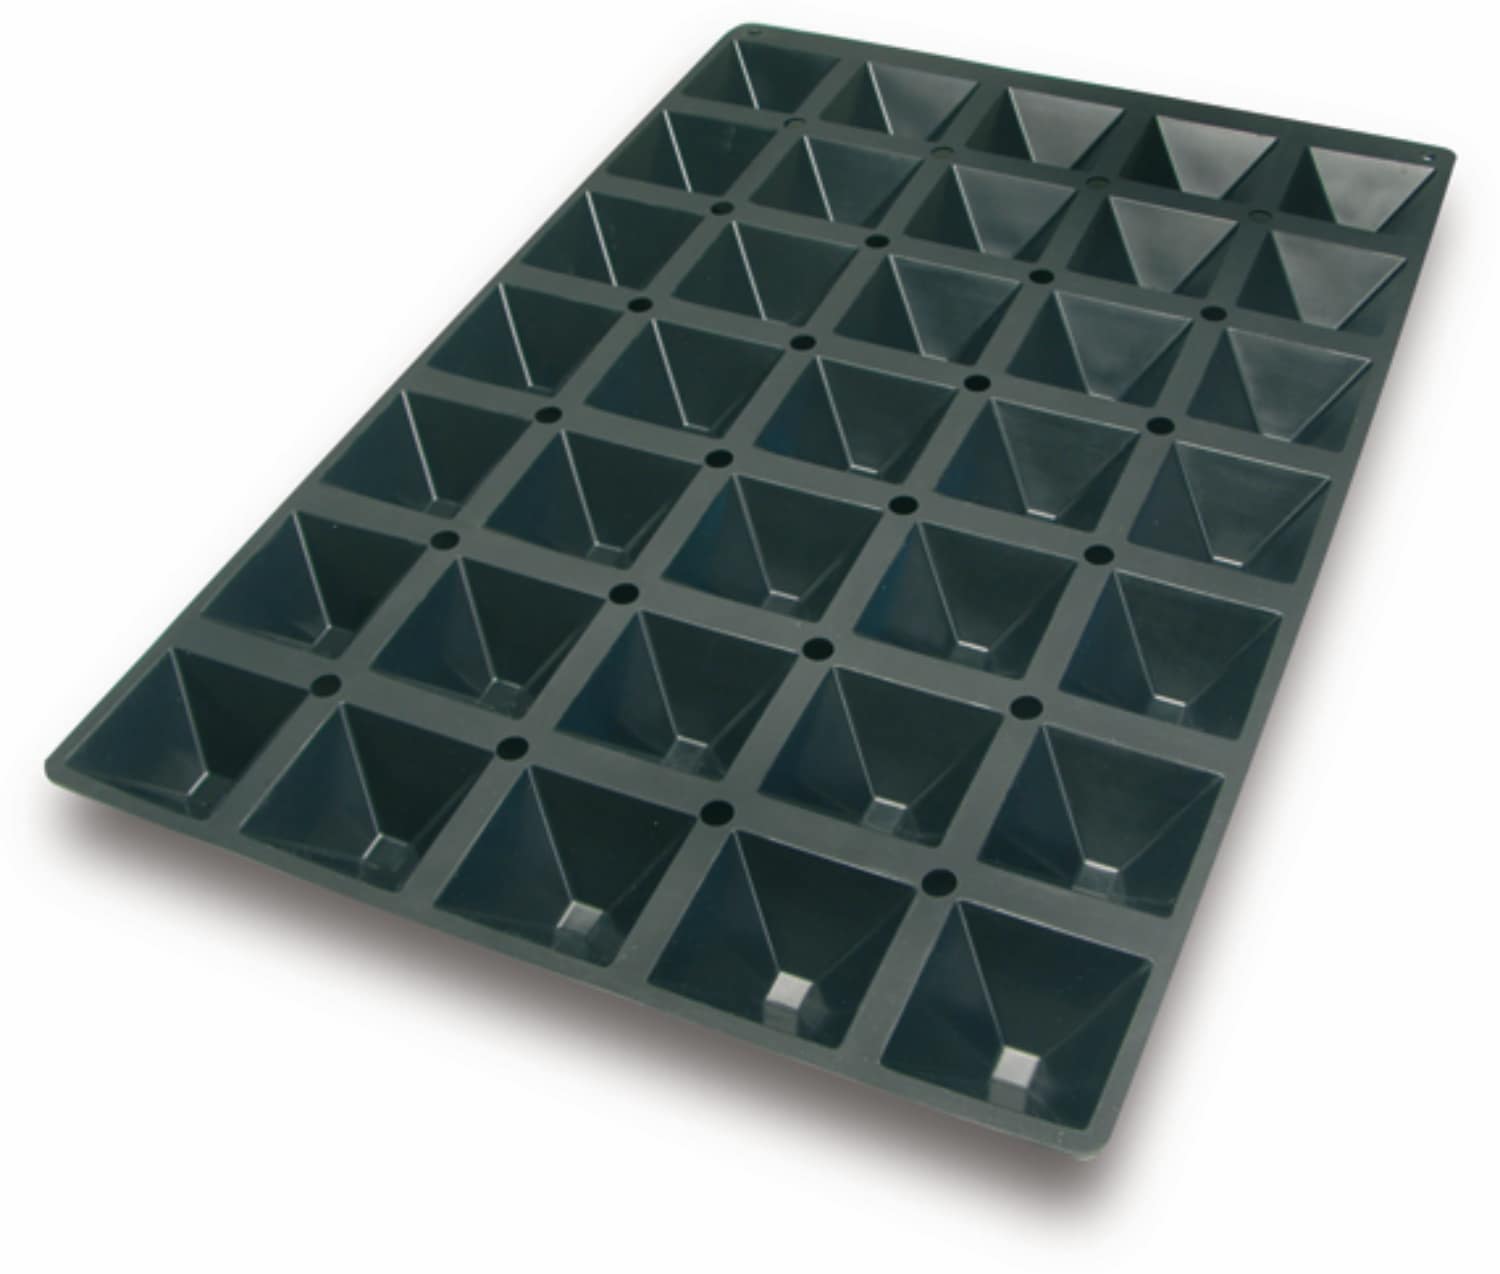 Silicone baking mould "Pyramid" 600 x 400 mm